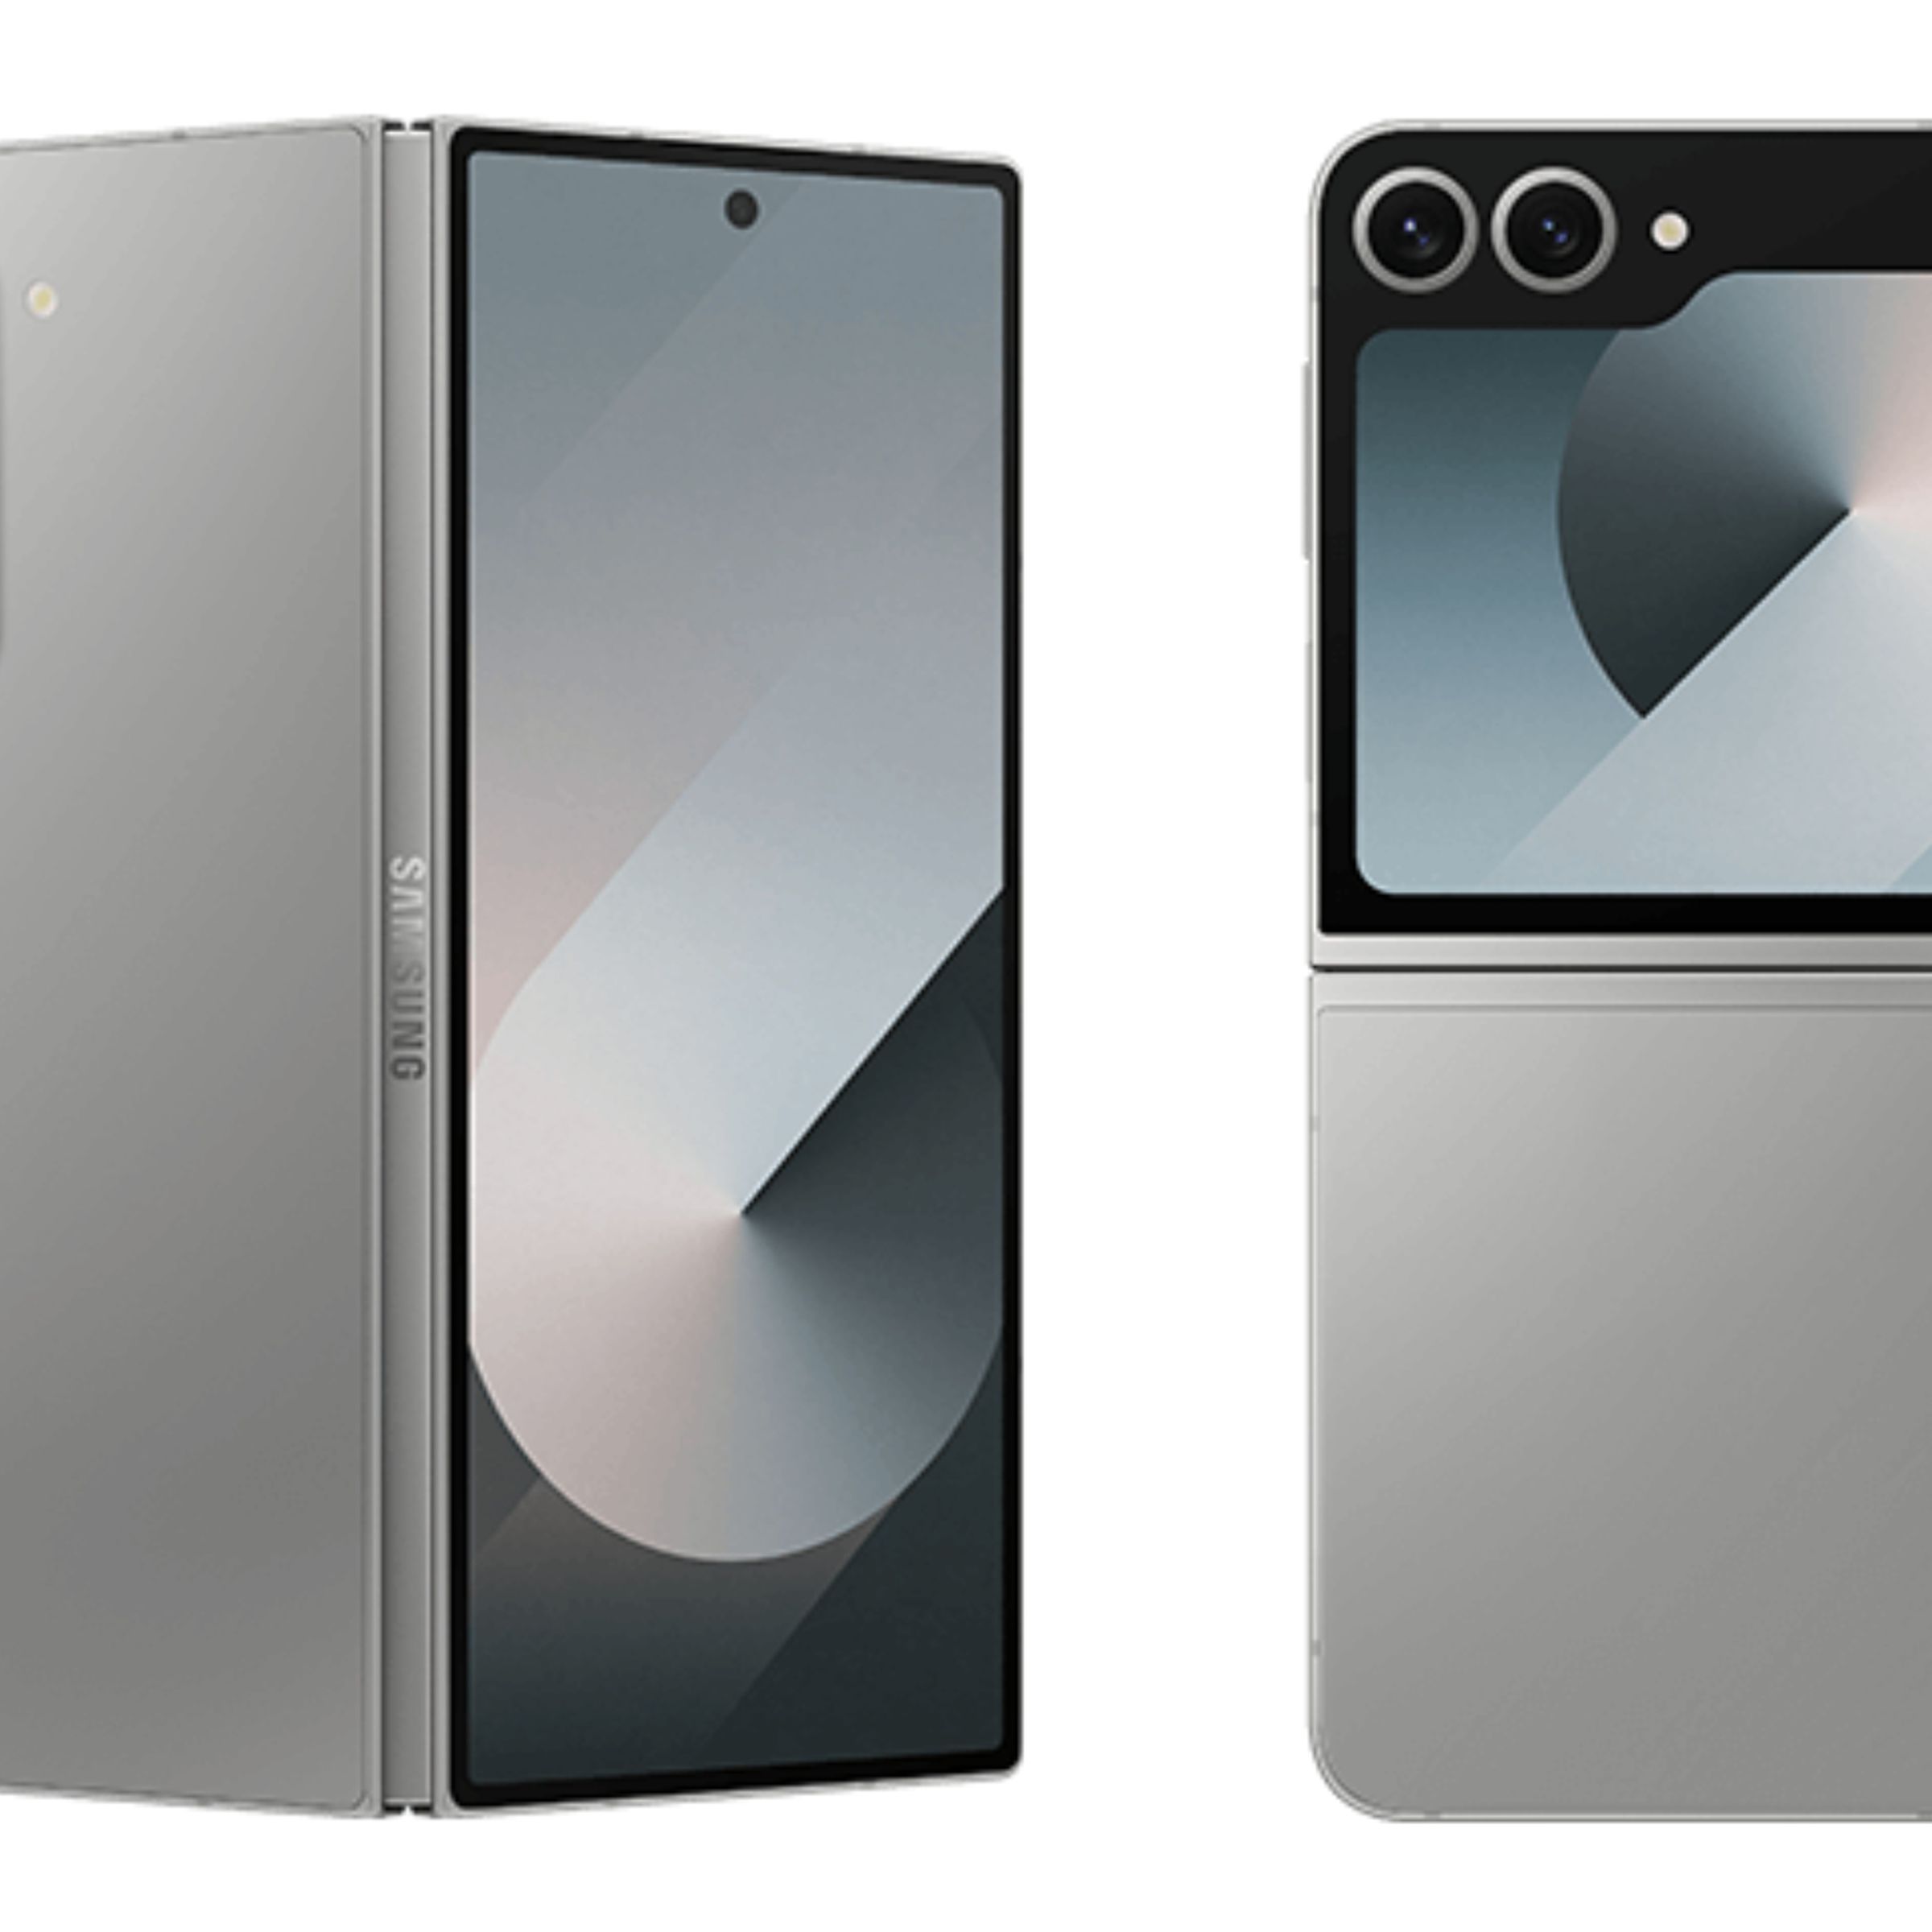 Leaked renders of the Samsung Galaxy Z Fold 6 and Flip 6 against a white backdrop.